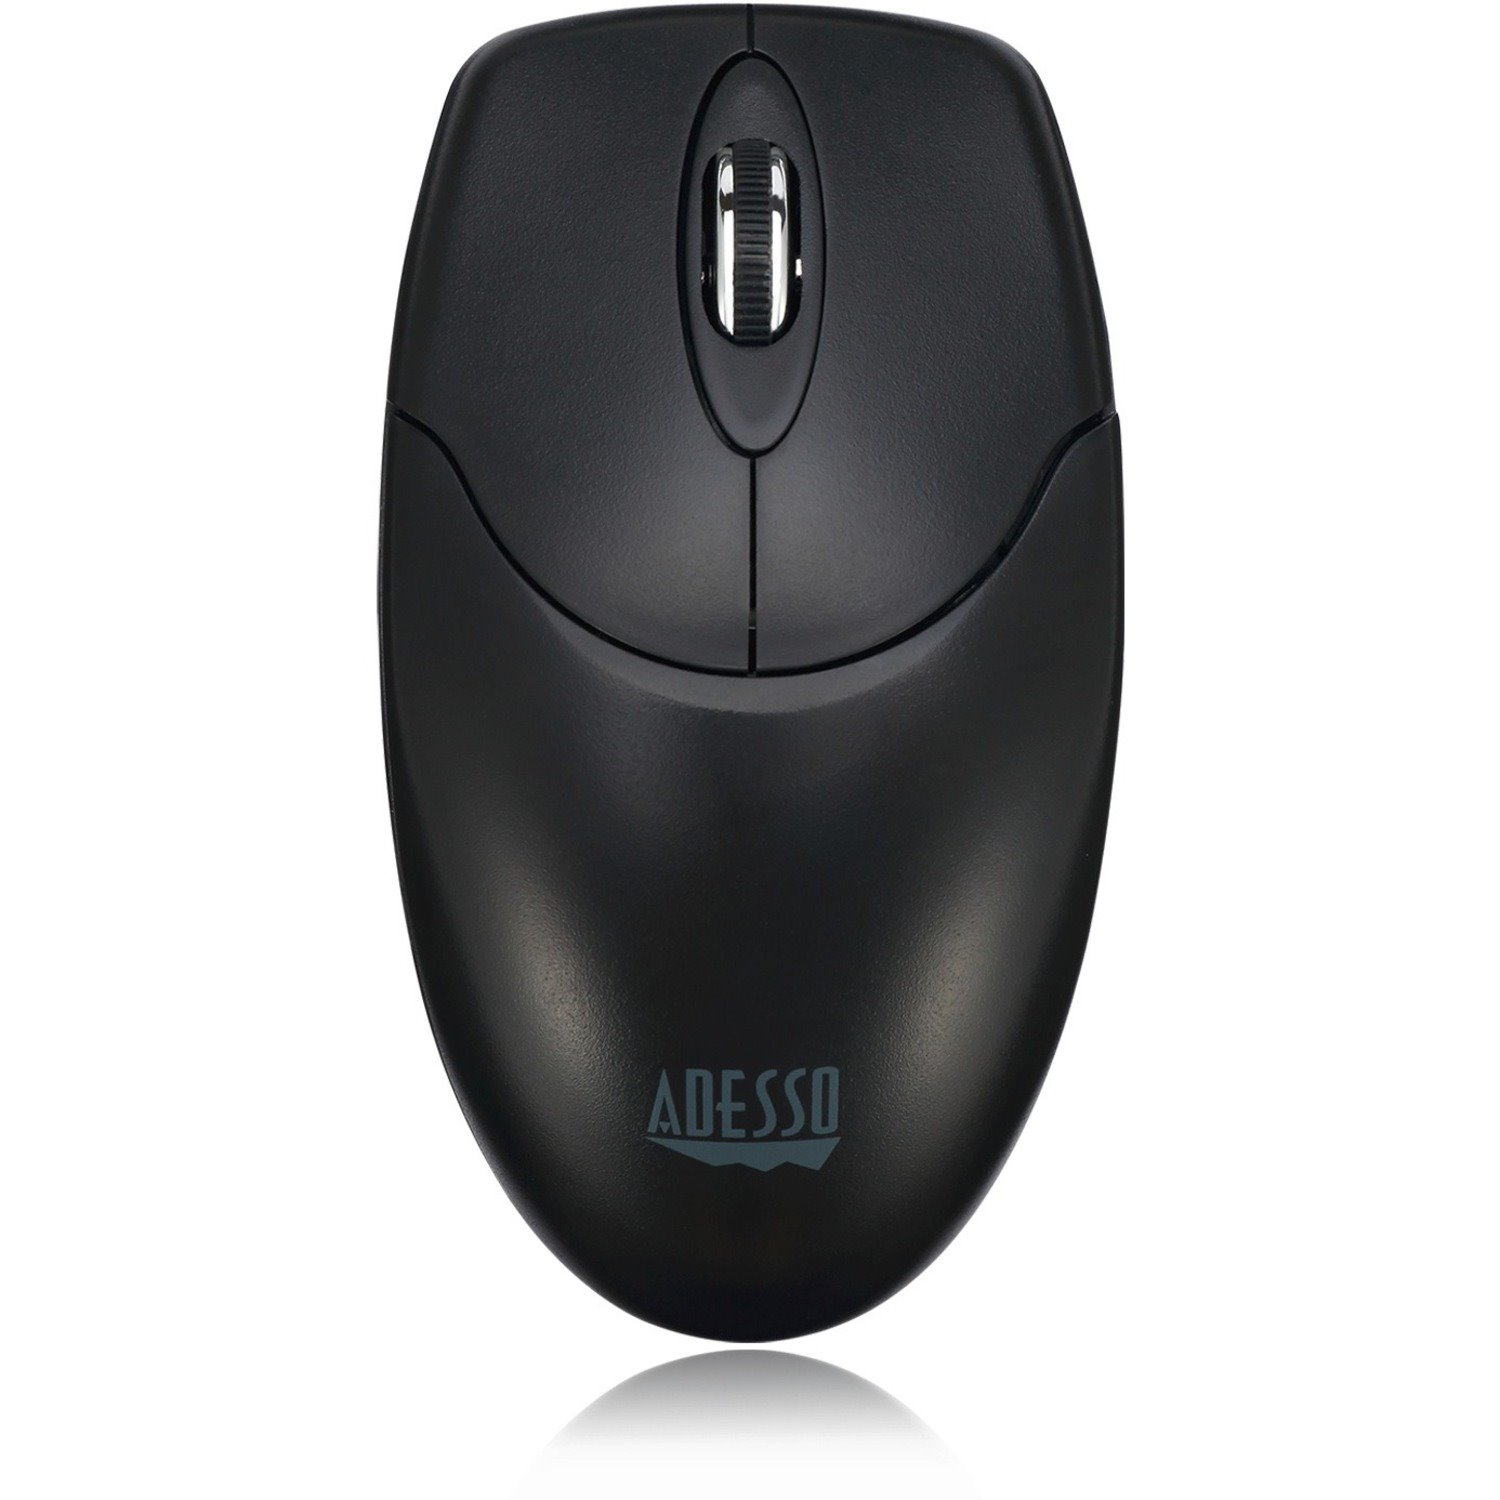 Adesso iMouse iMouse M40 Full-size Mouse - Radio Frequency - USB - Optical - 3 Button(s) - Black